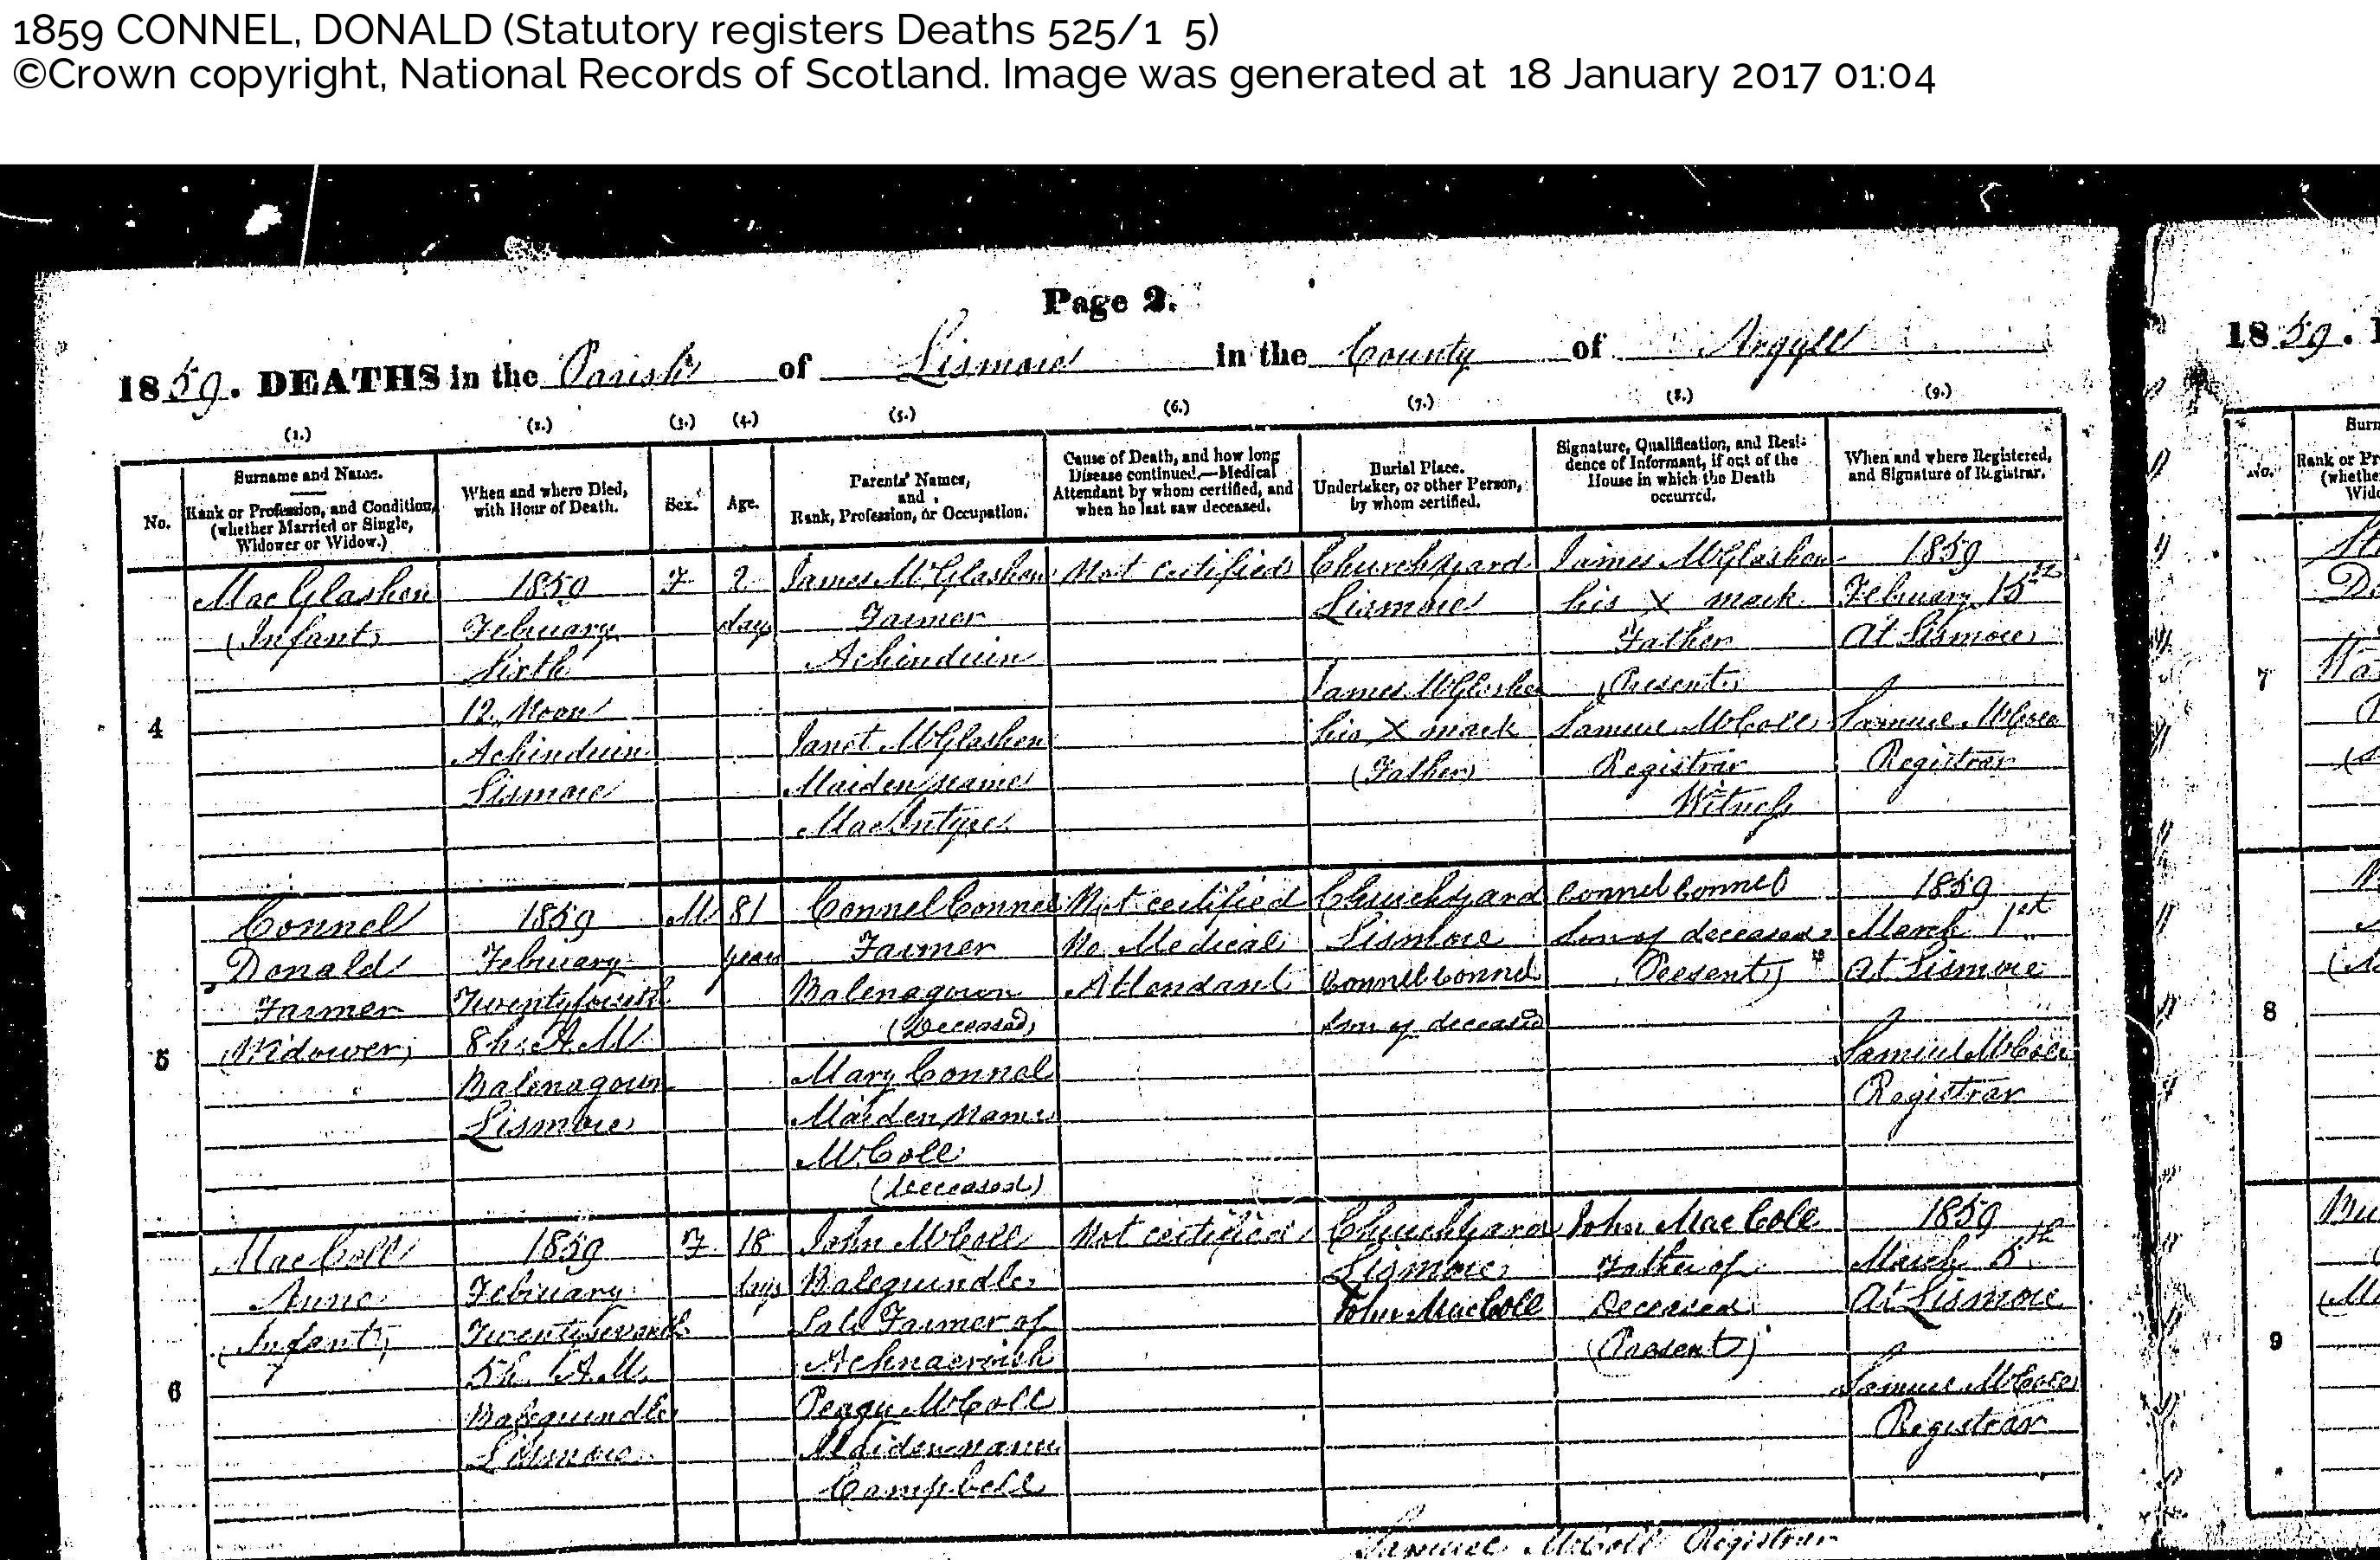 Donald Connell - death 1859, Linked To: <a href='profiles/i1218.html' >Donald Connell 🧬</a>